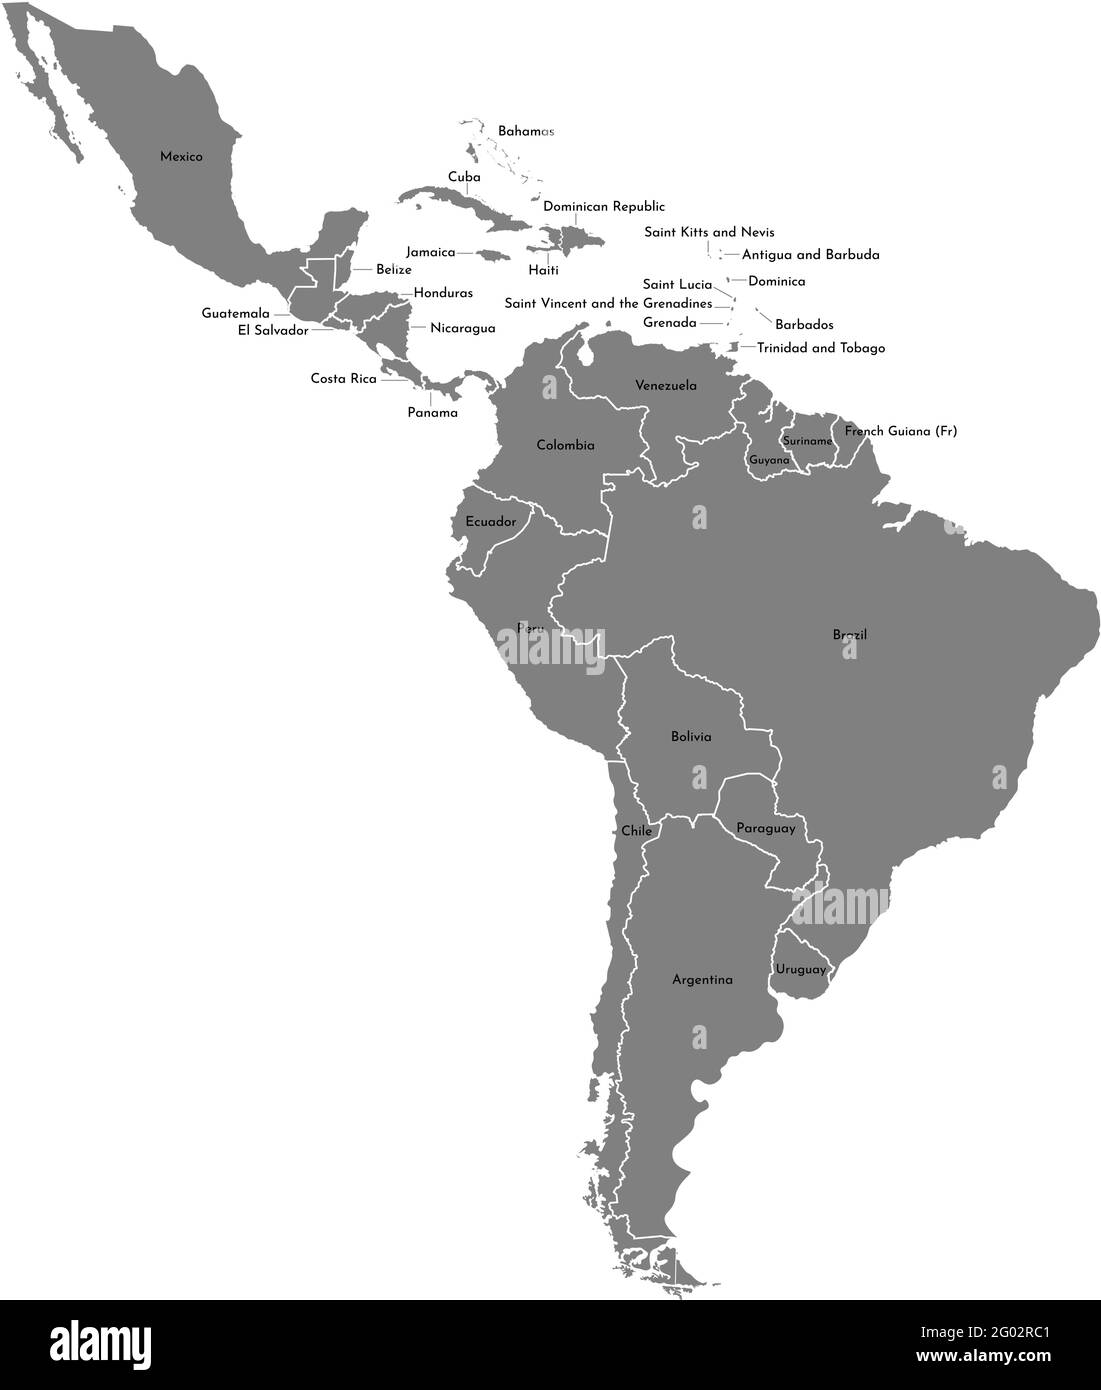 Central america map Black and White Stock Photos & Images - Alamy